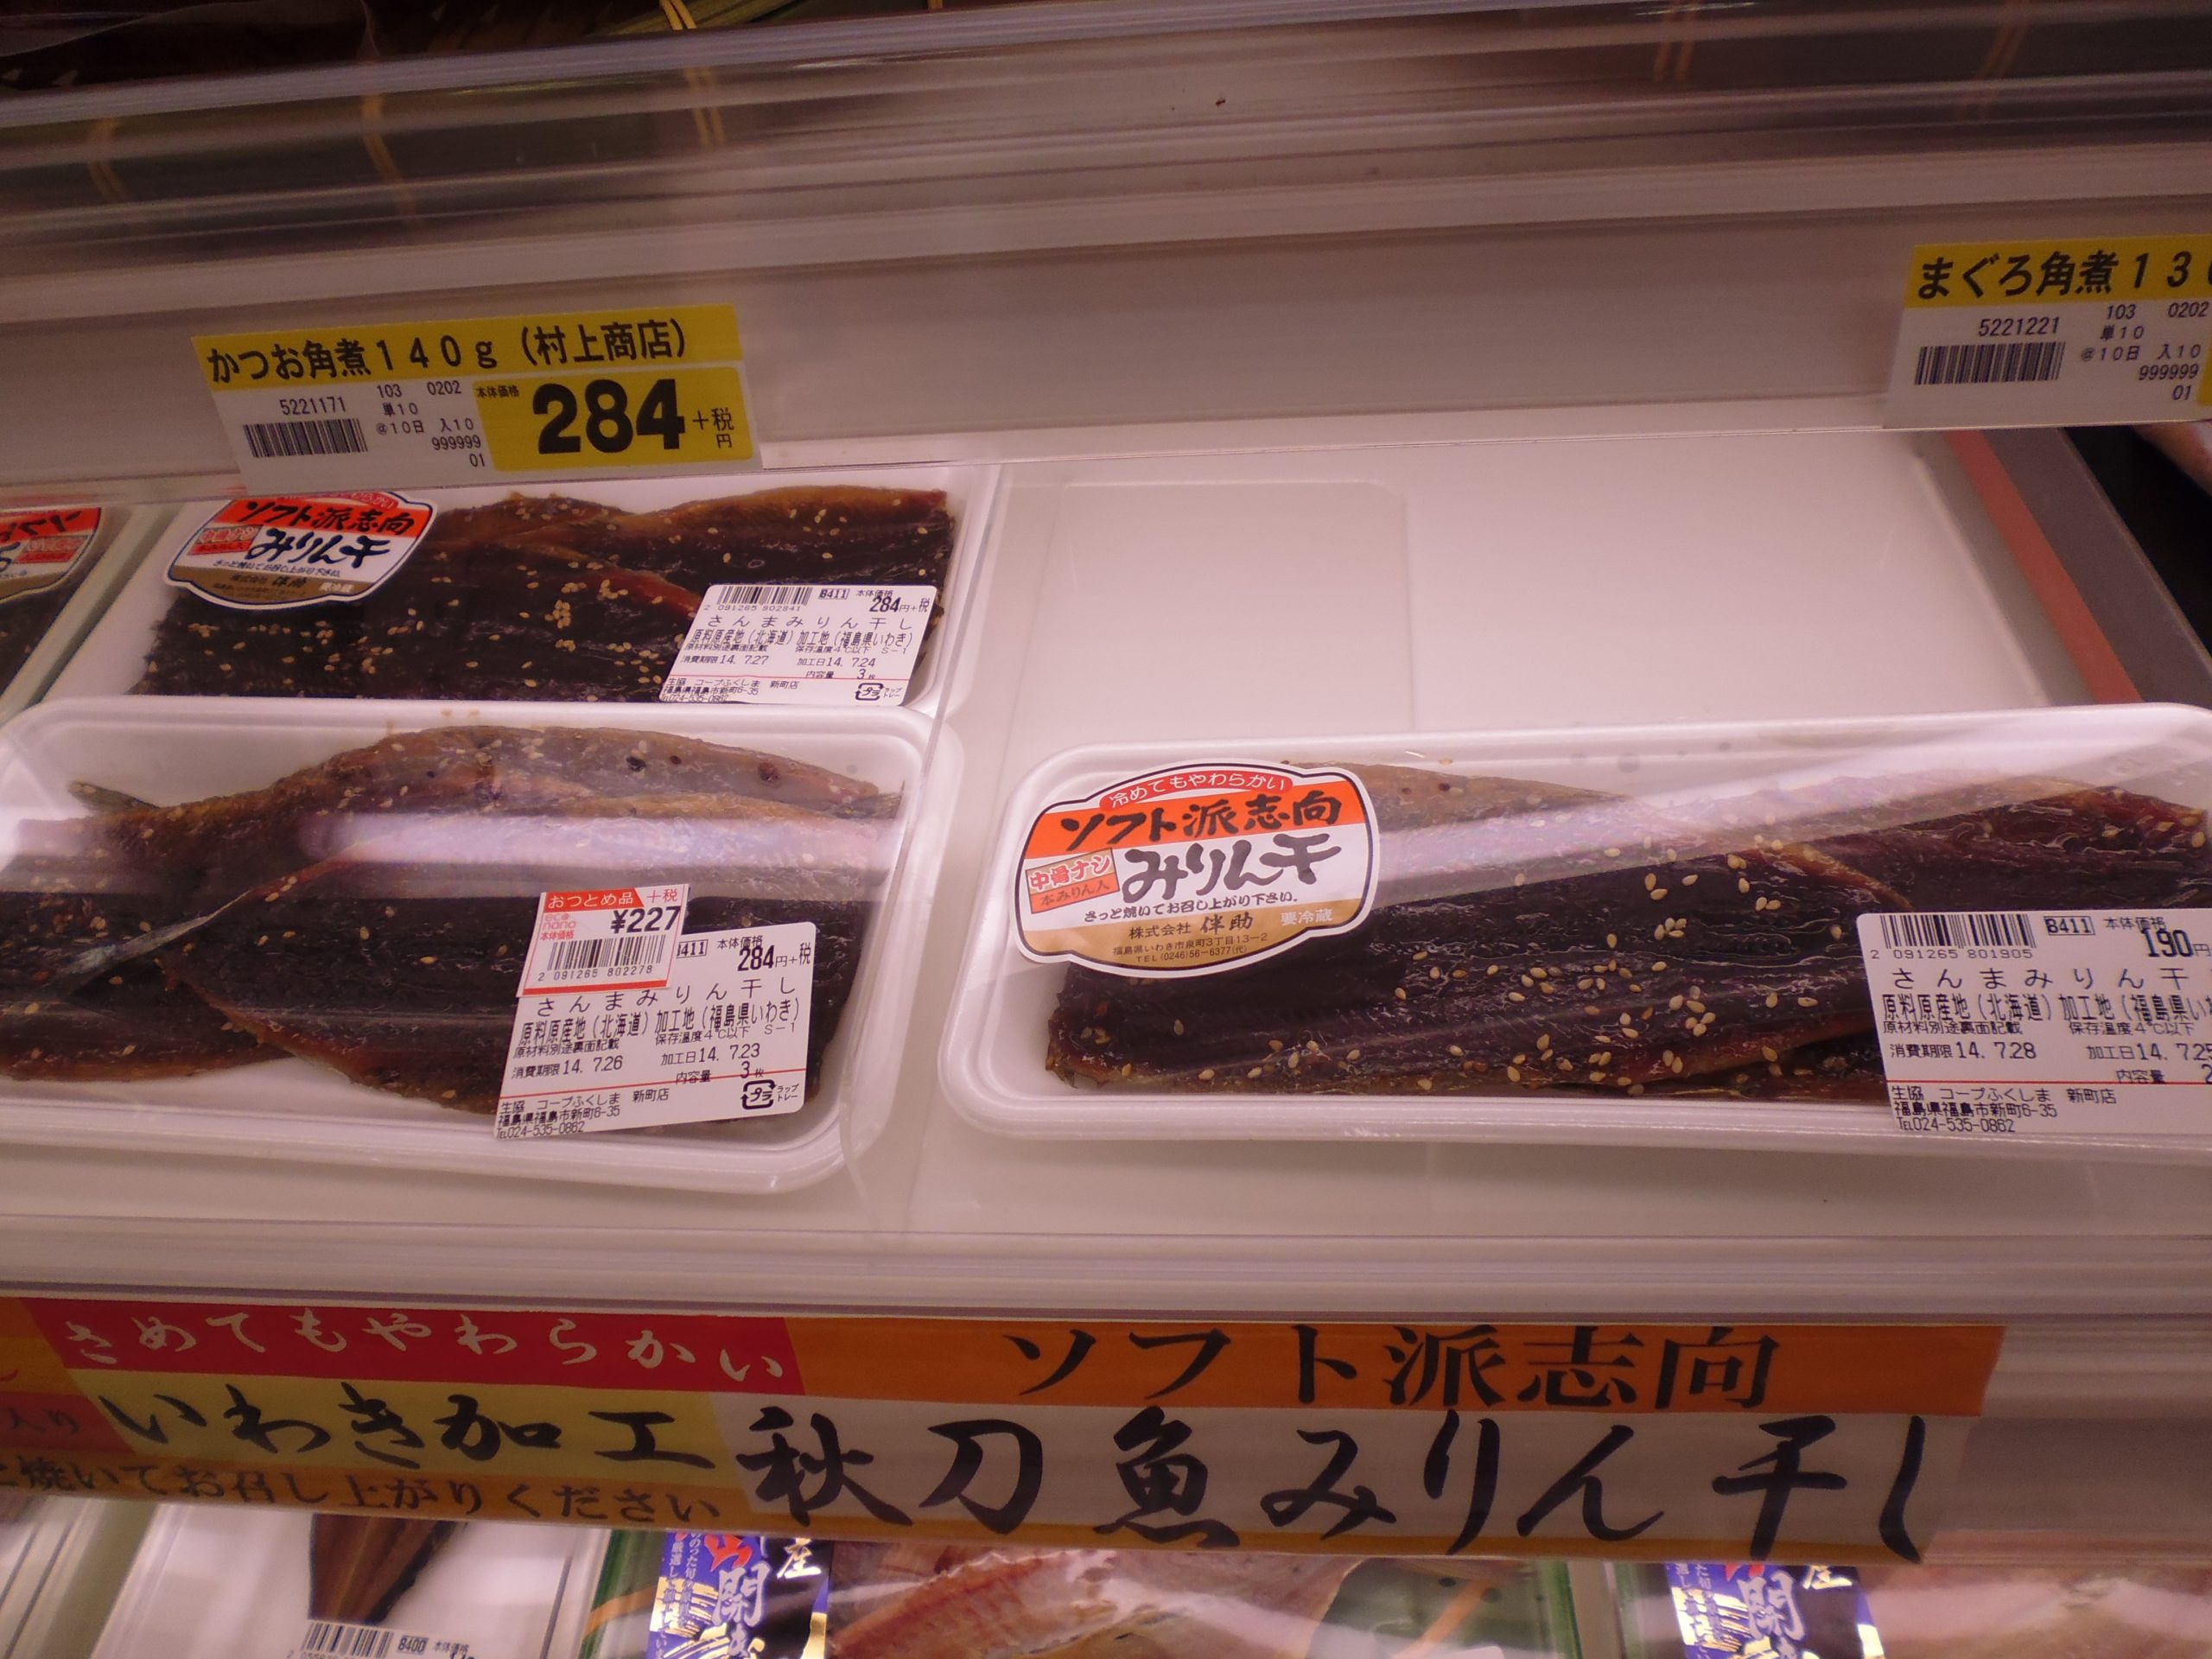 Pacific saury landed in Iwaki - back on sale post-disaster